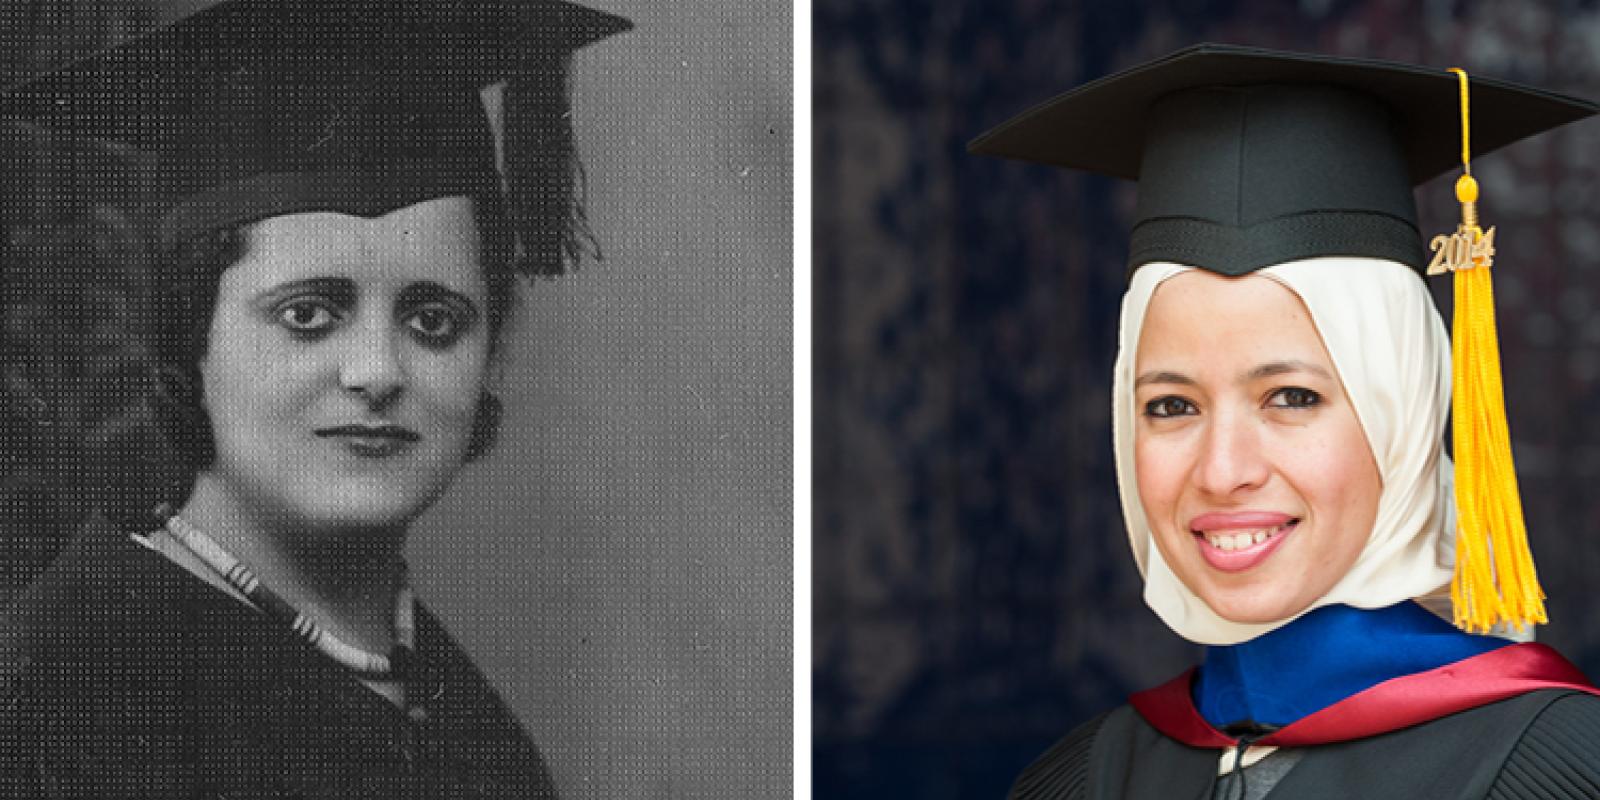 Eva Habib El Masri '31 was the first female student admitted to AUC, and Yosra El Maghraby '04, '08, '14 is the first PhD student to graduate from AUC